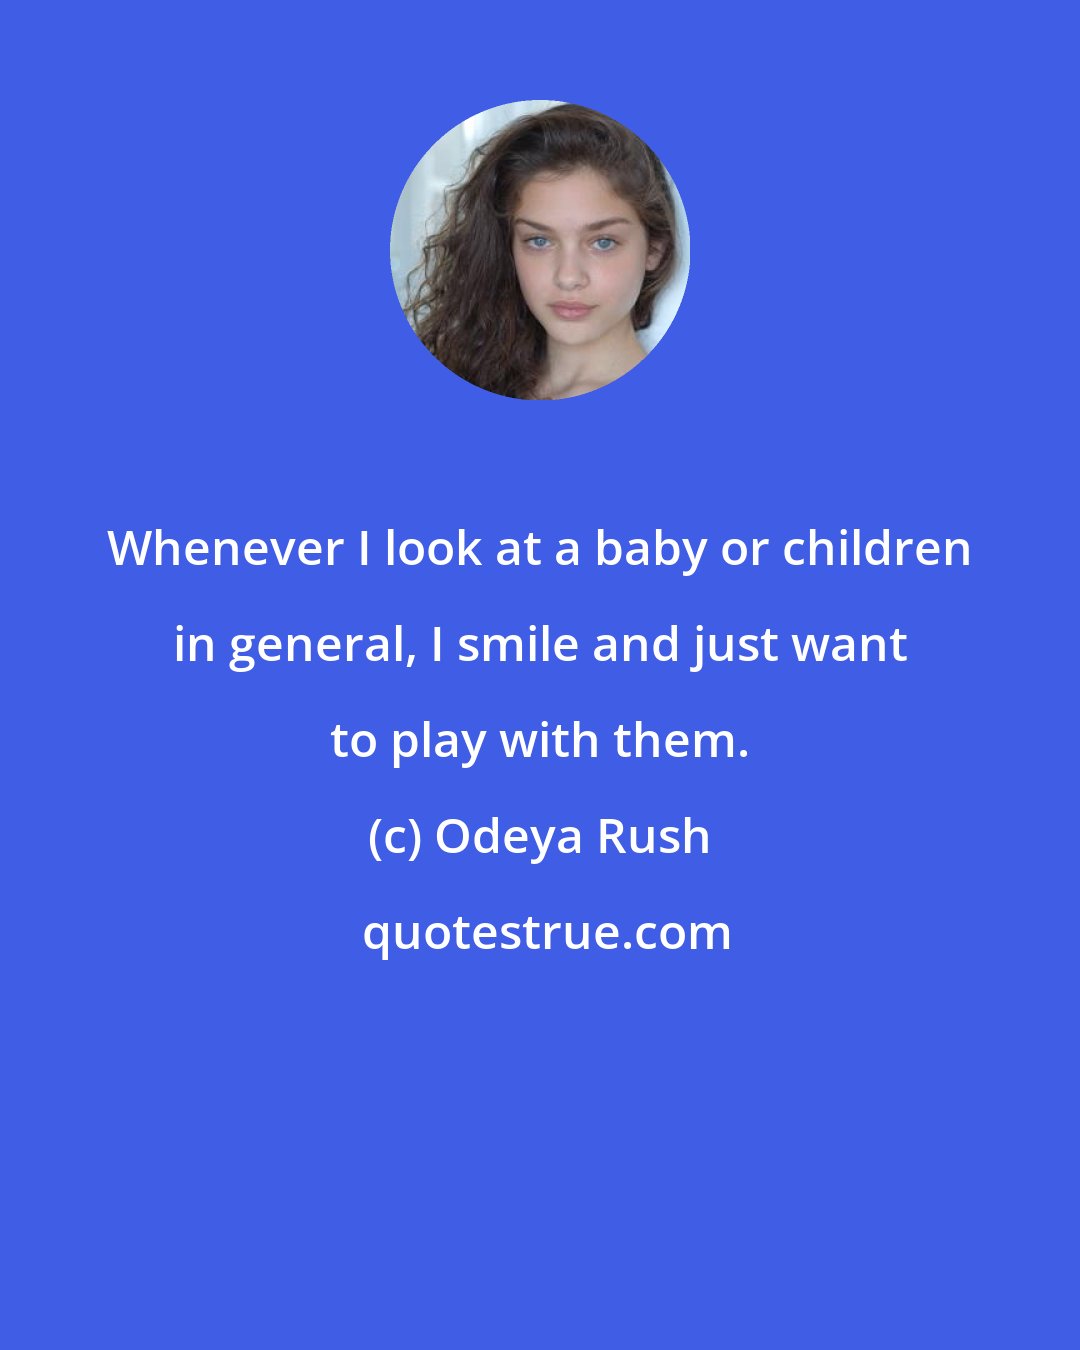 Odeya Rush: Whenever I look at a baby or children in general, I smile and just want to play with them.